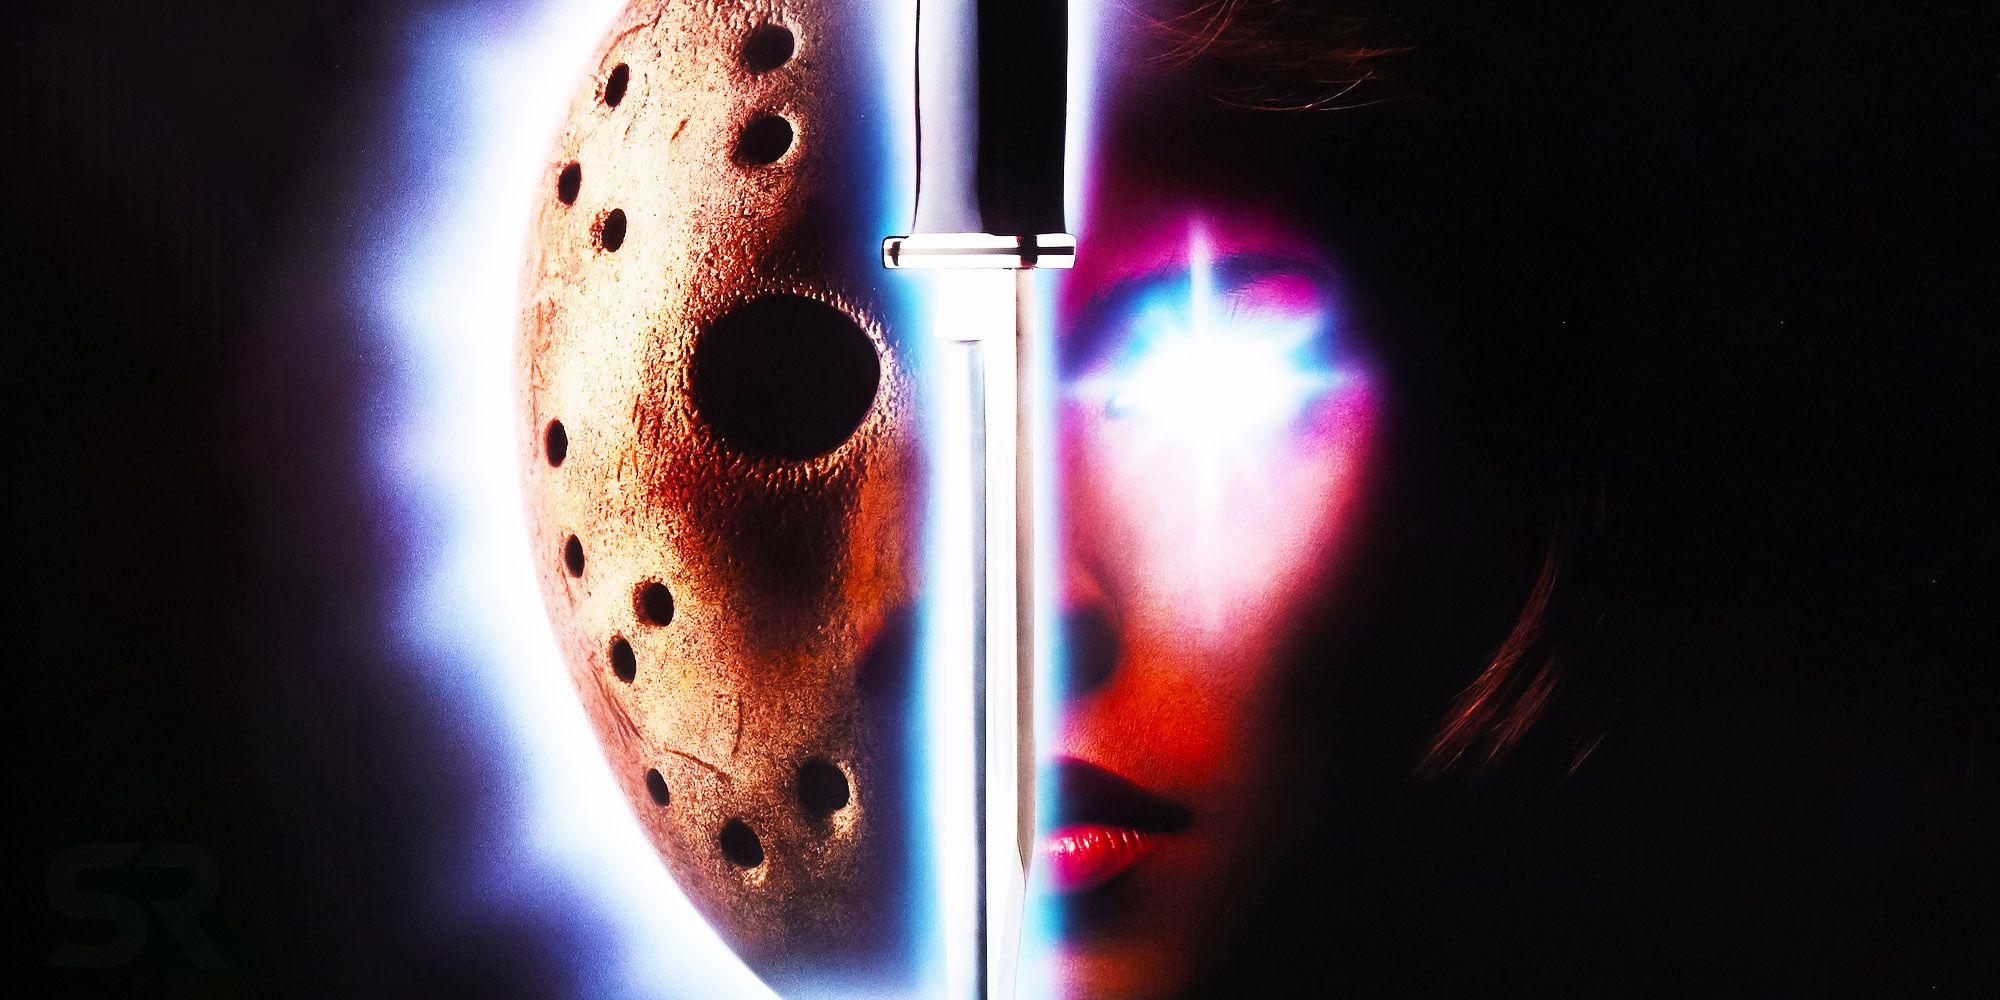 Friday the 13th part 7 New blood jason